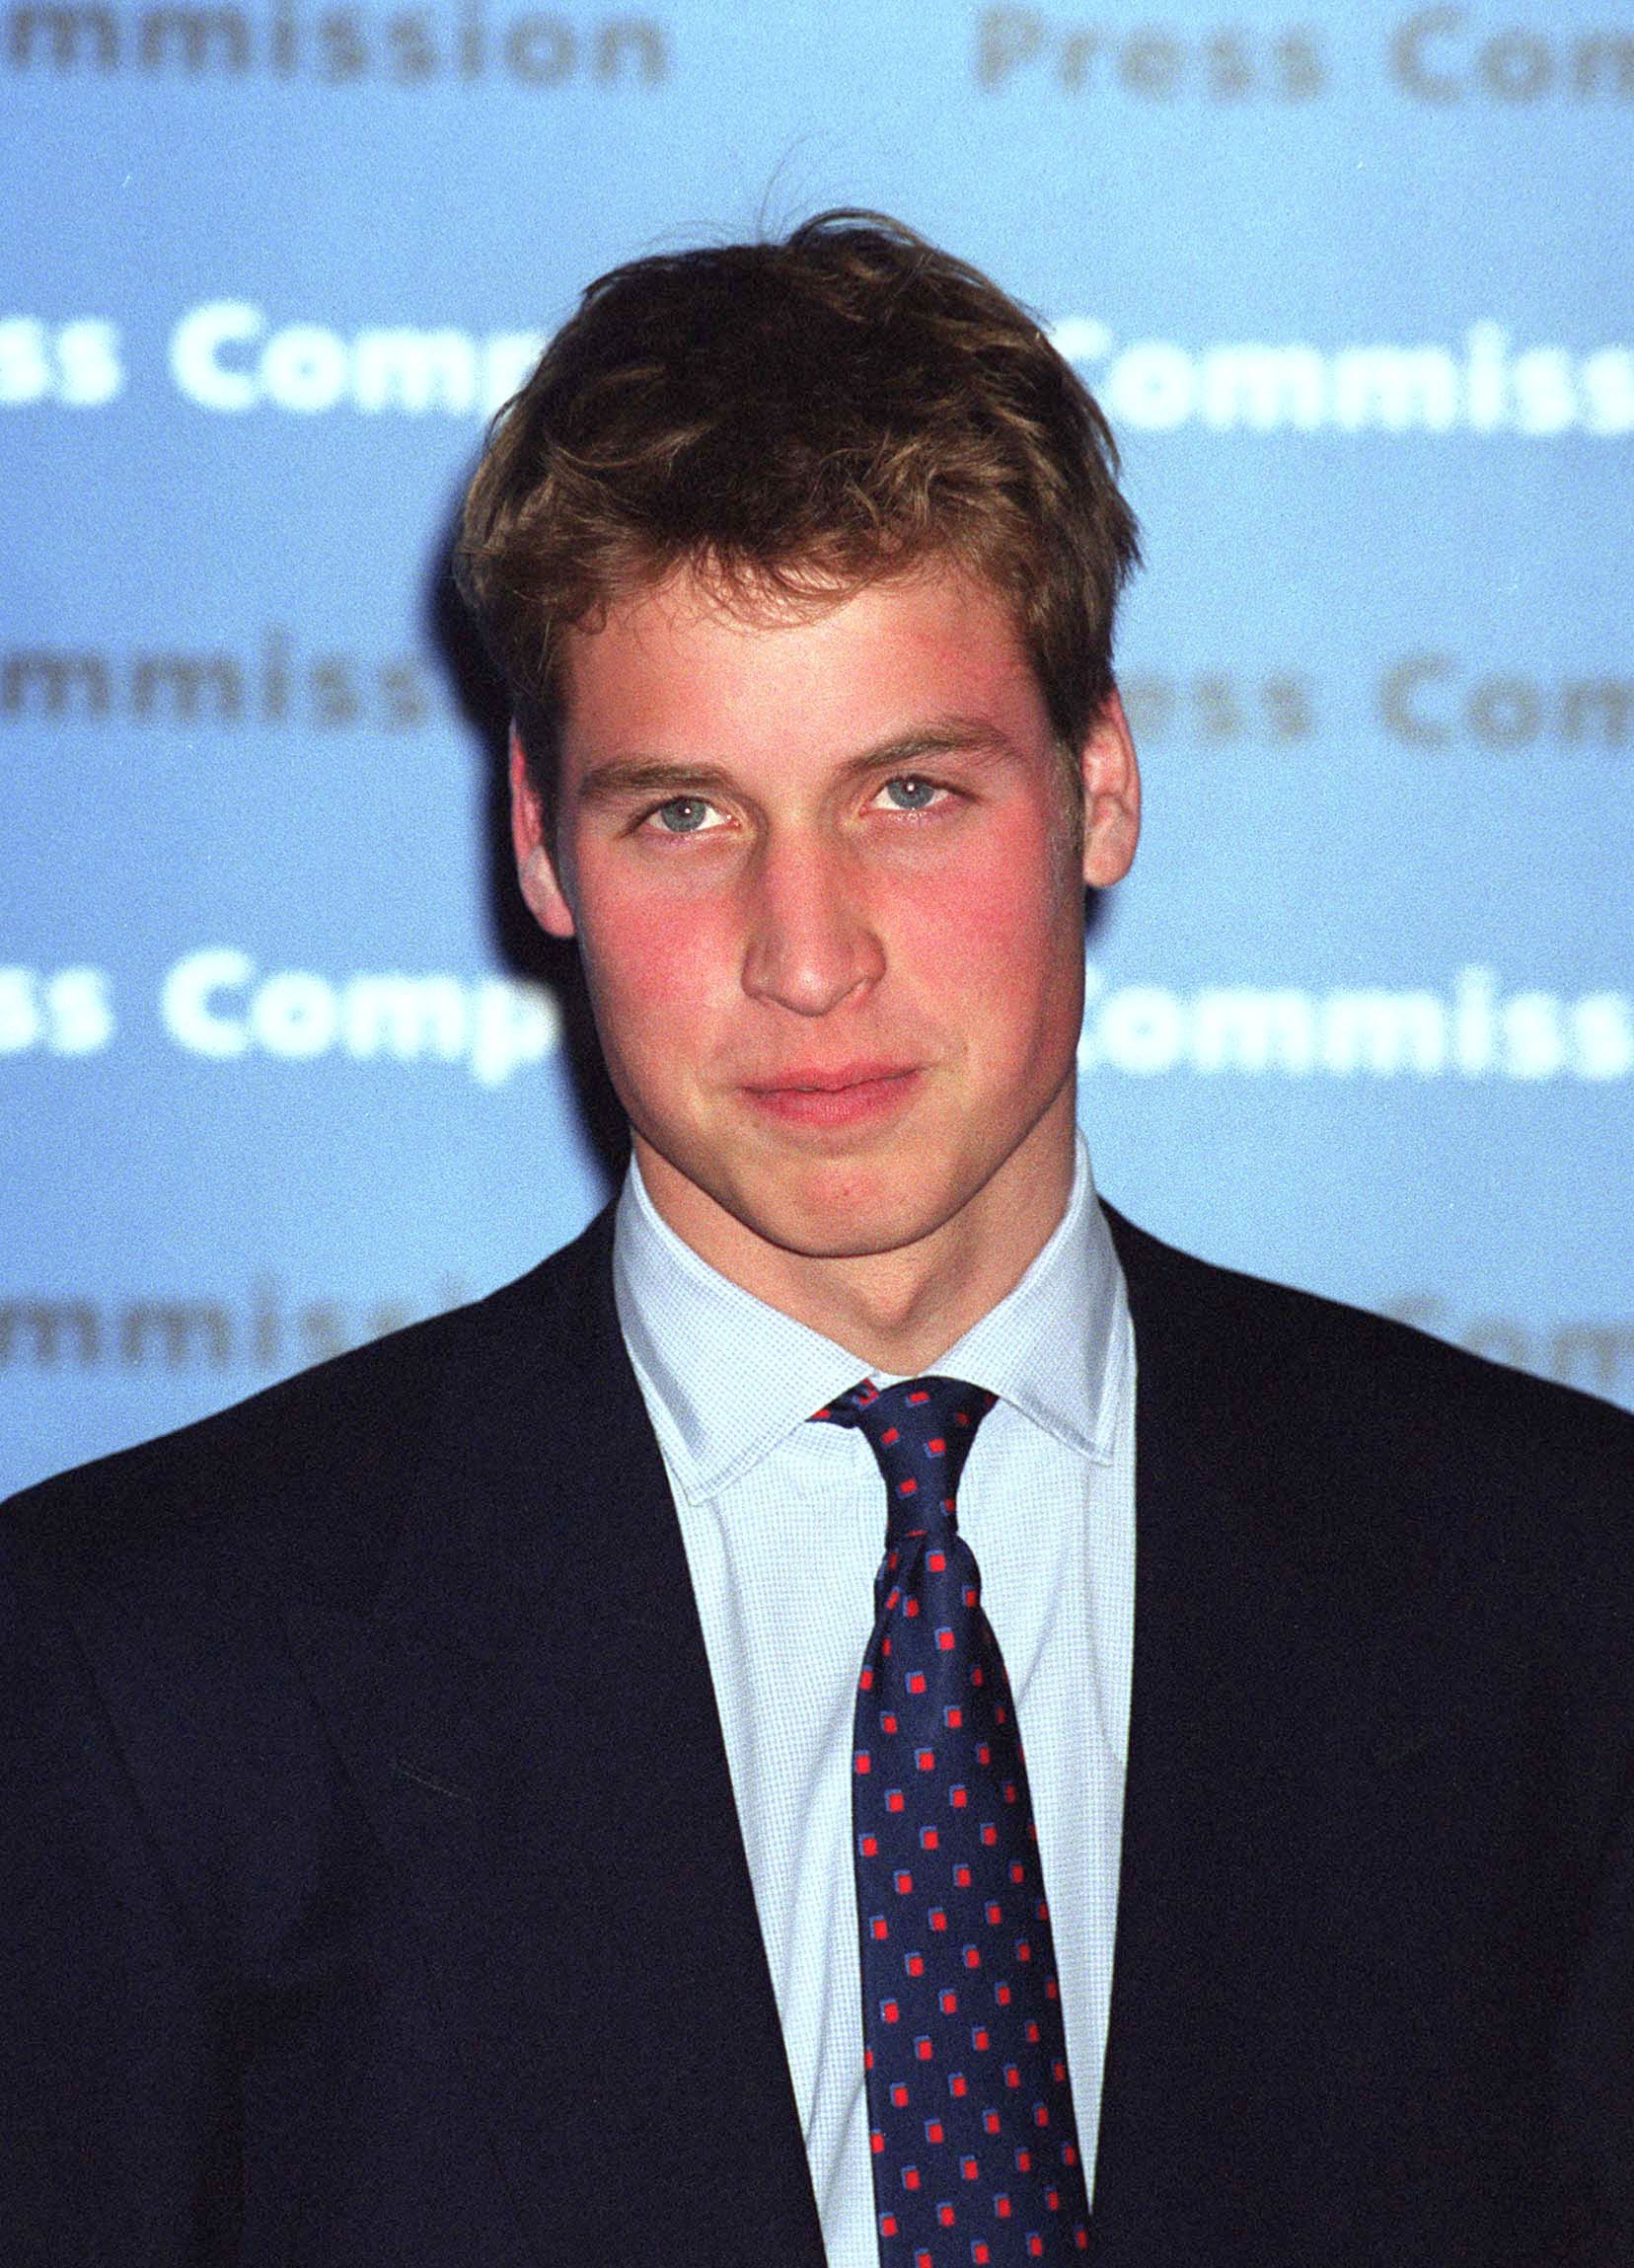 Prince William attending the Press Complaints Commission's 10th Anniversary Reception at London's Somerset House on February 7, 2001 in London, England. / Source: Getty Images